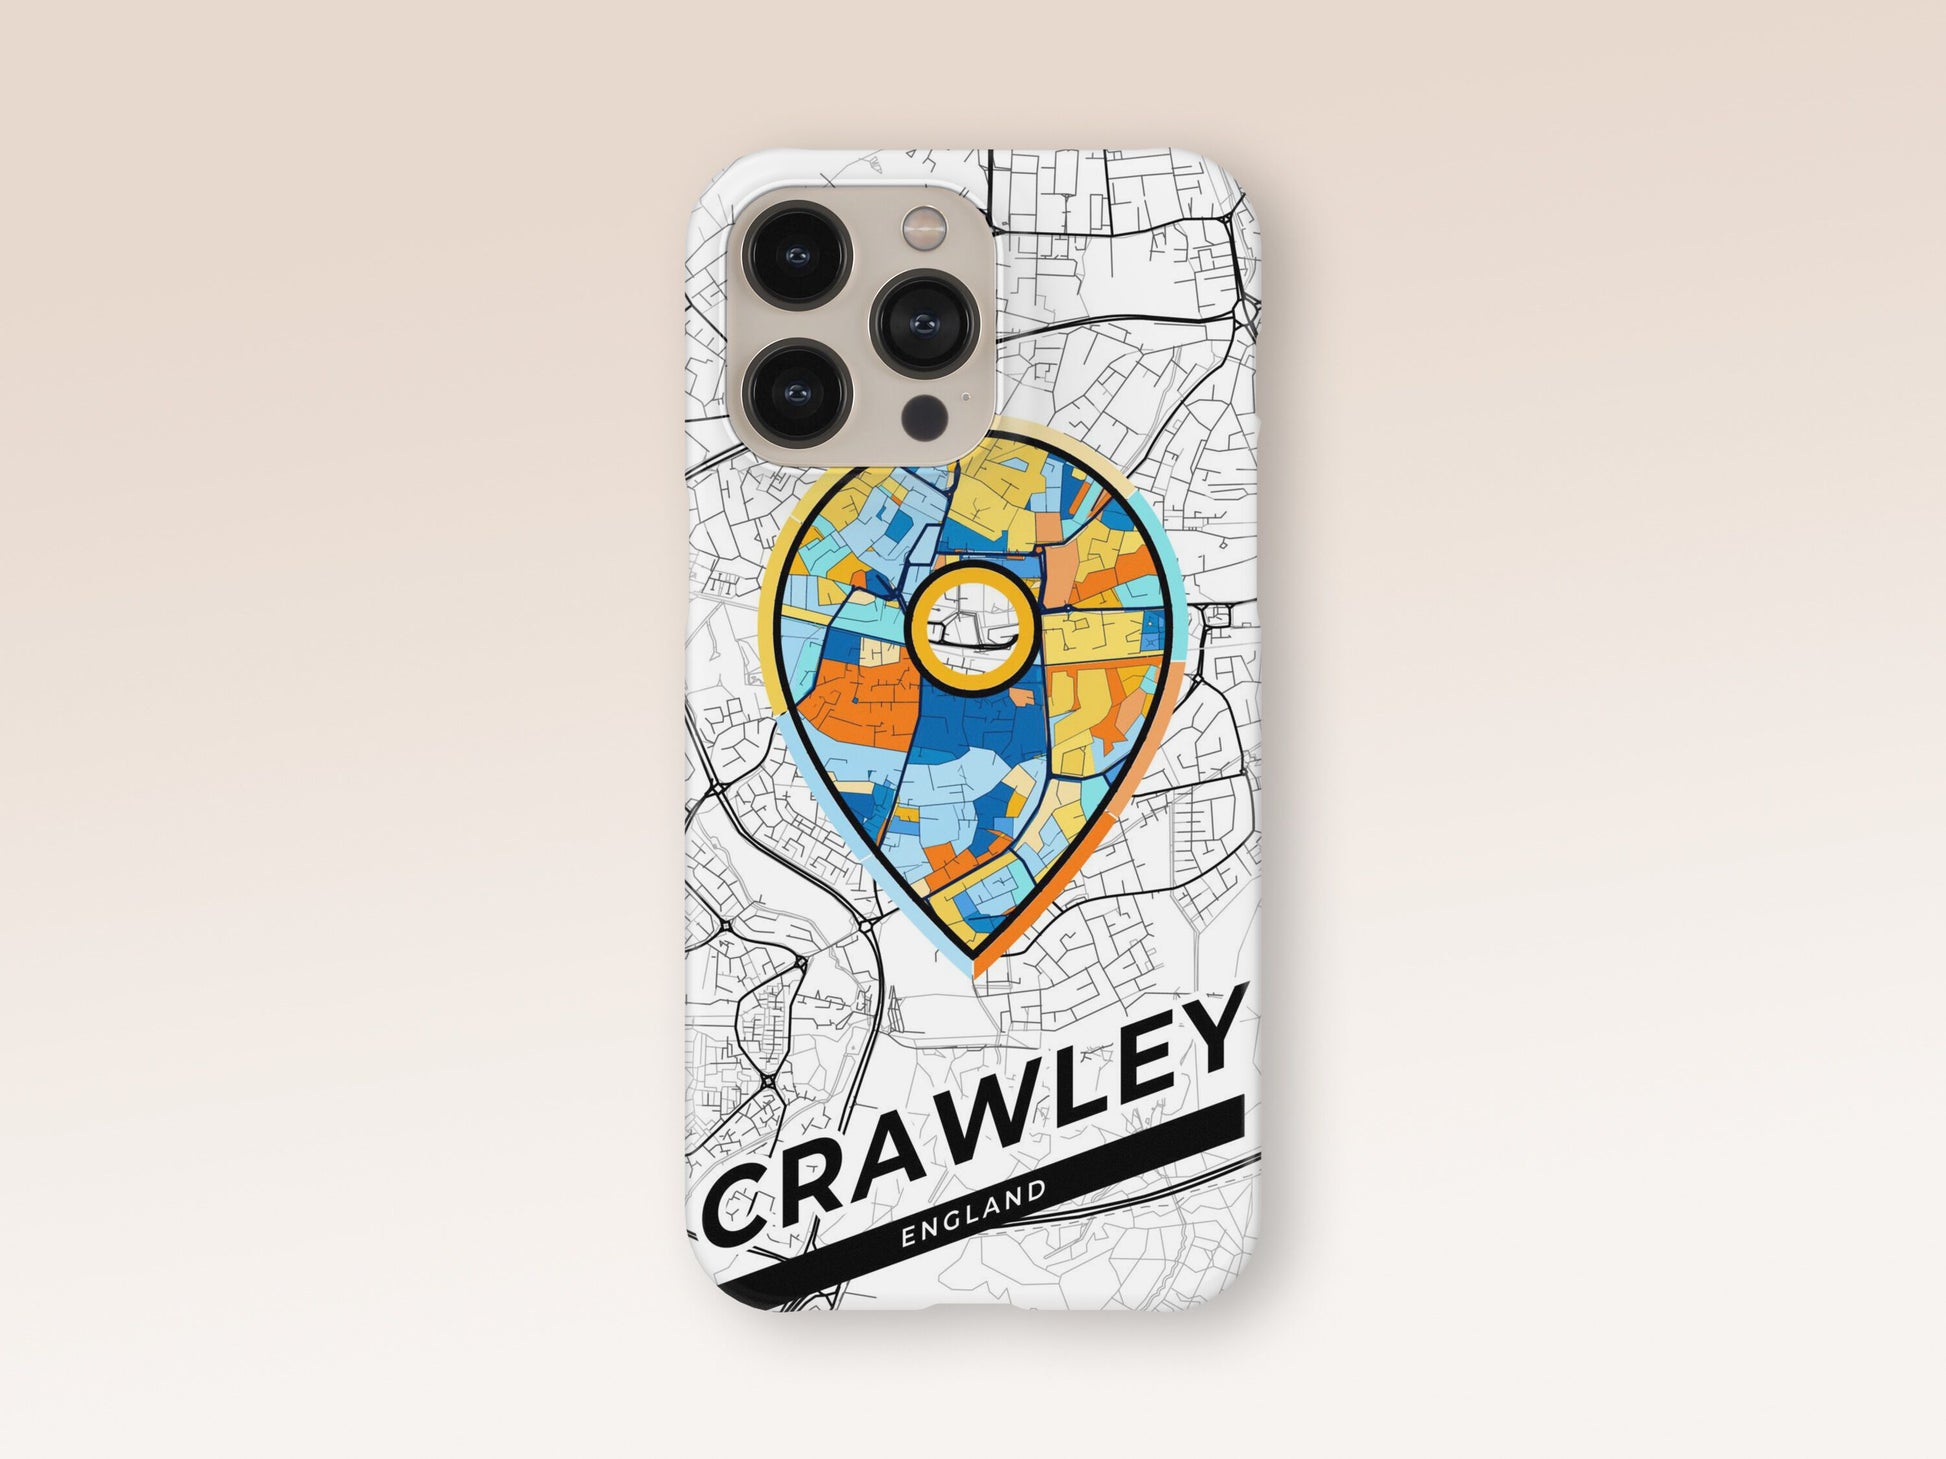 Crawley England slim phone case with colorful icon. Birthday, wedding or housewarming gift. Couple match cases. 1